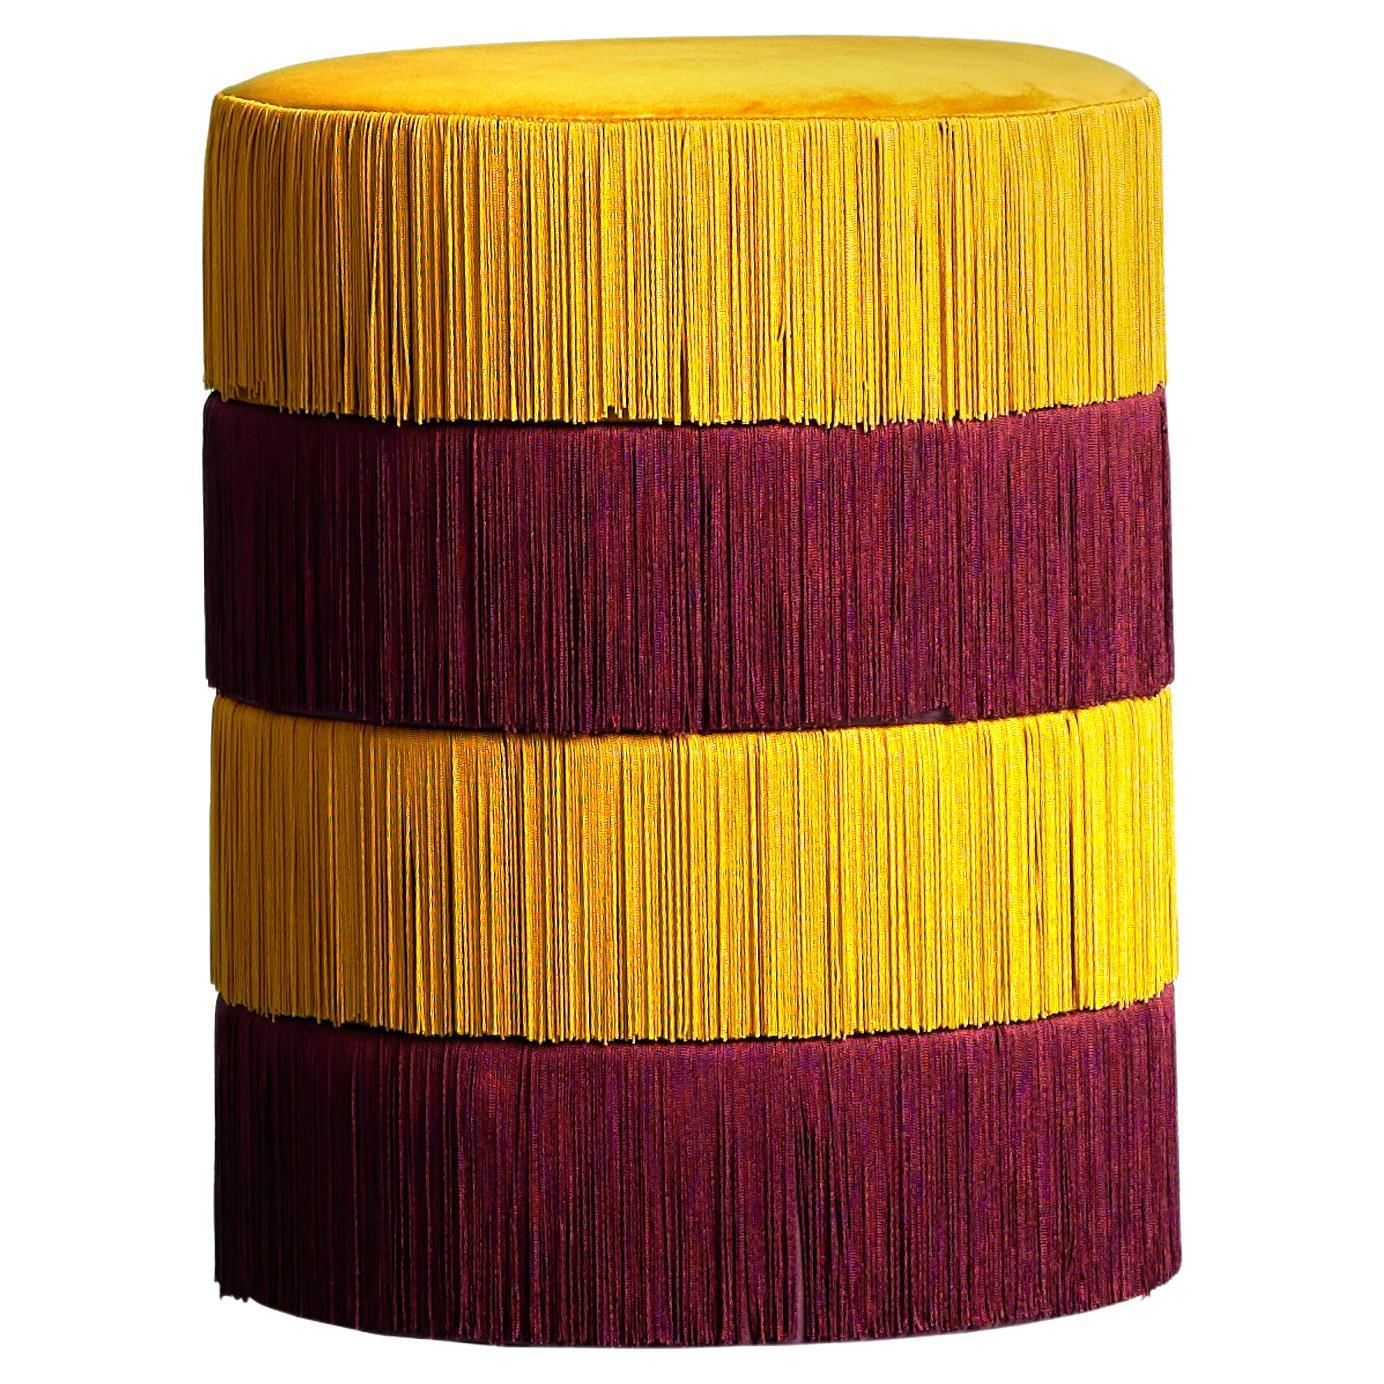 Chachachá Pouf by Houtique